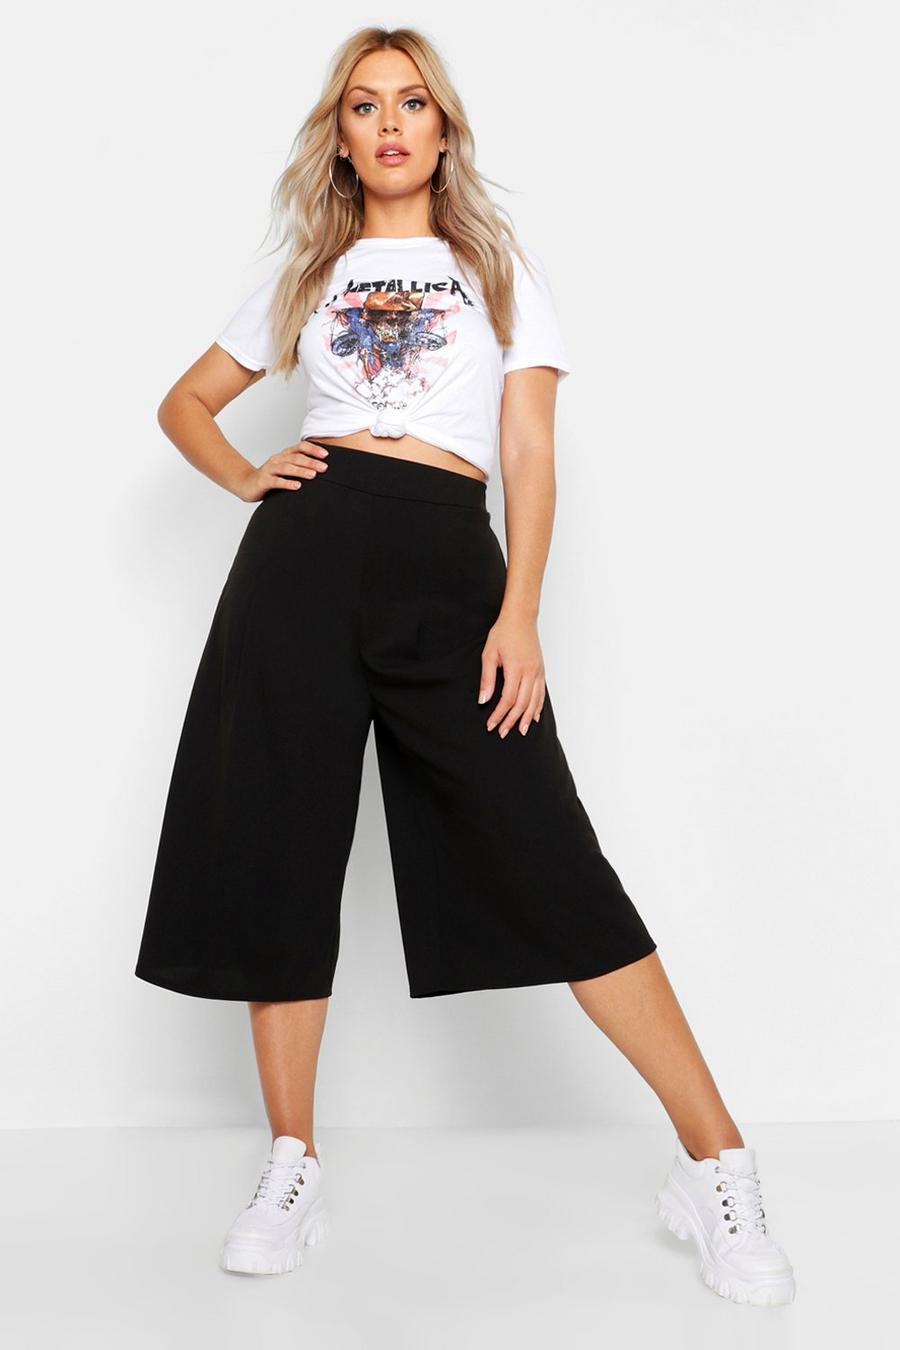 Final Thoughts on Women's Culottes